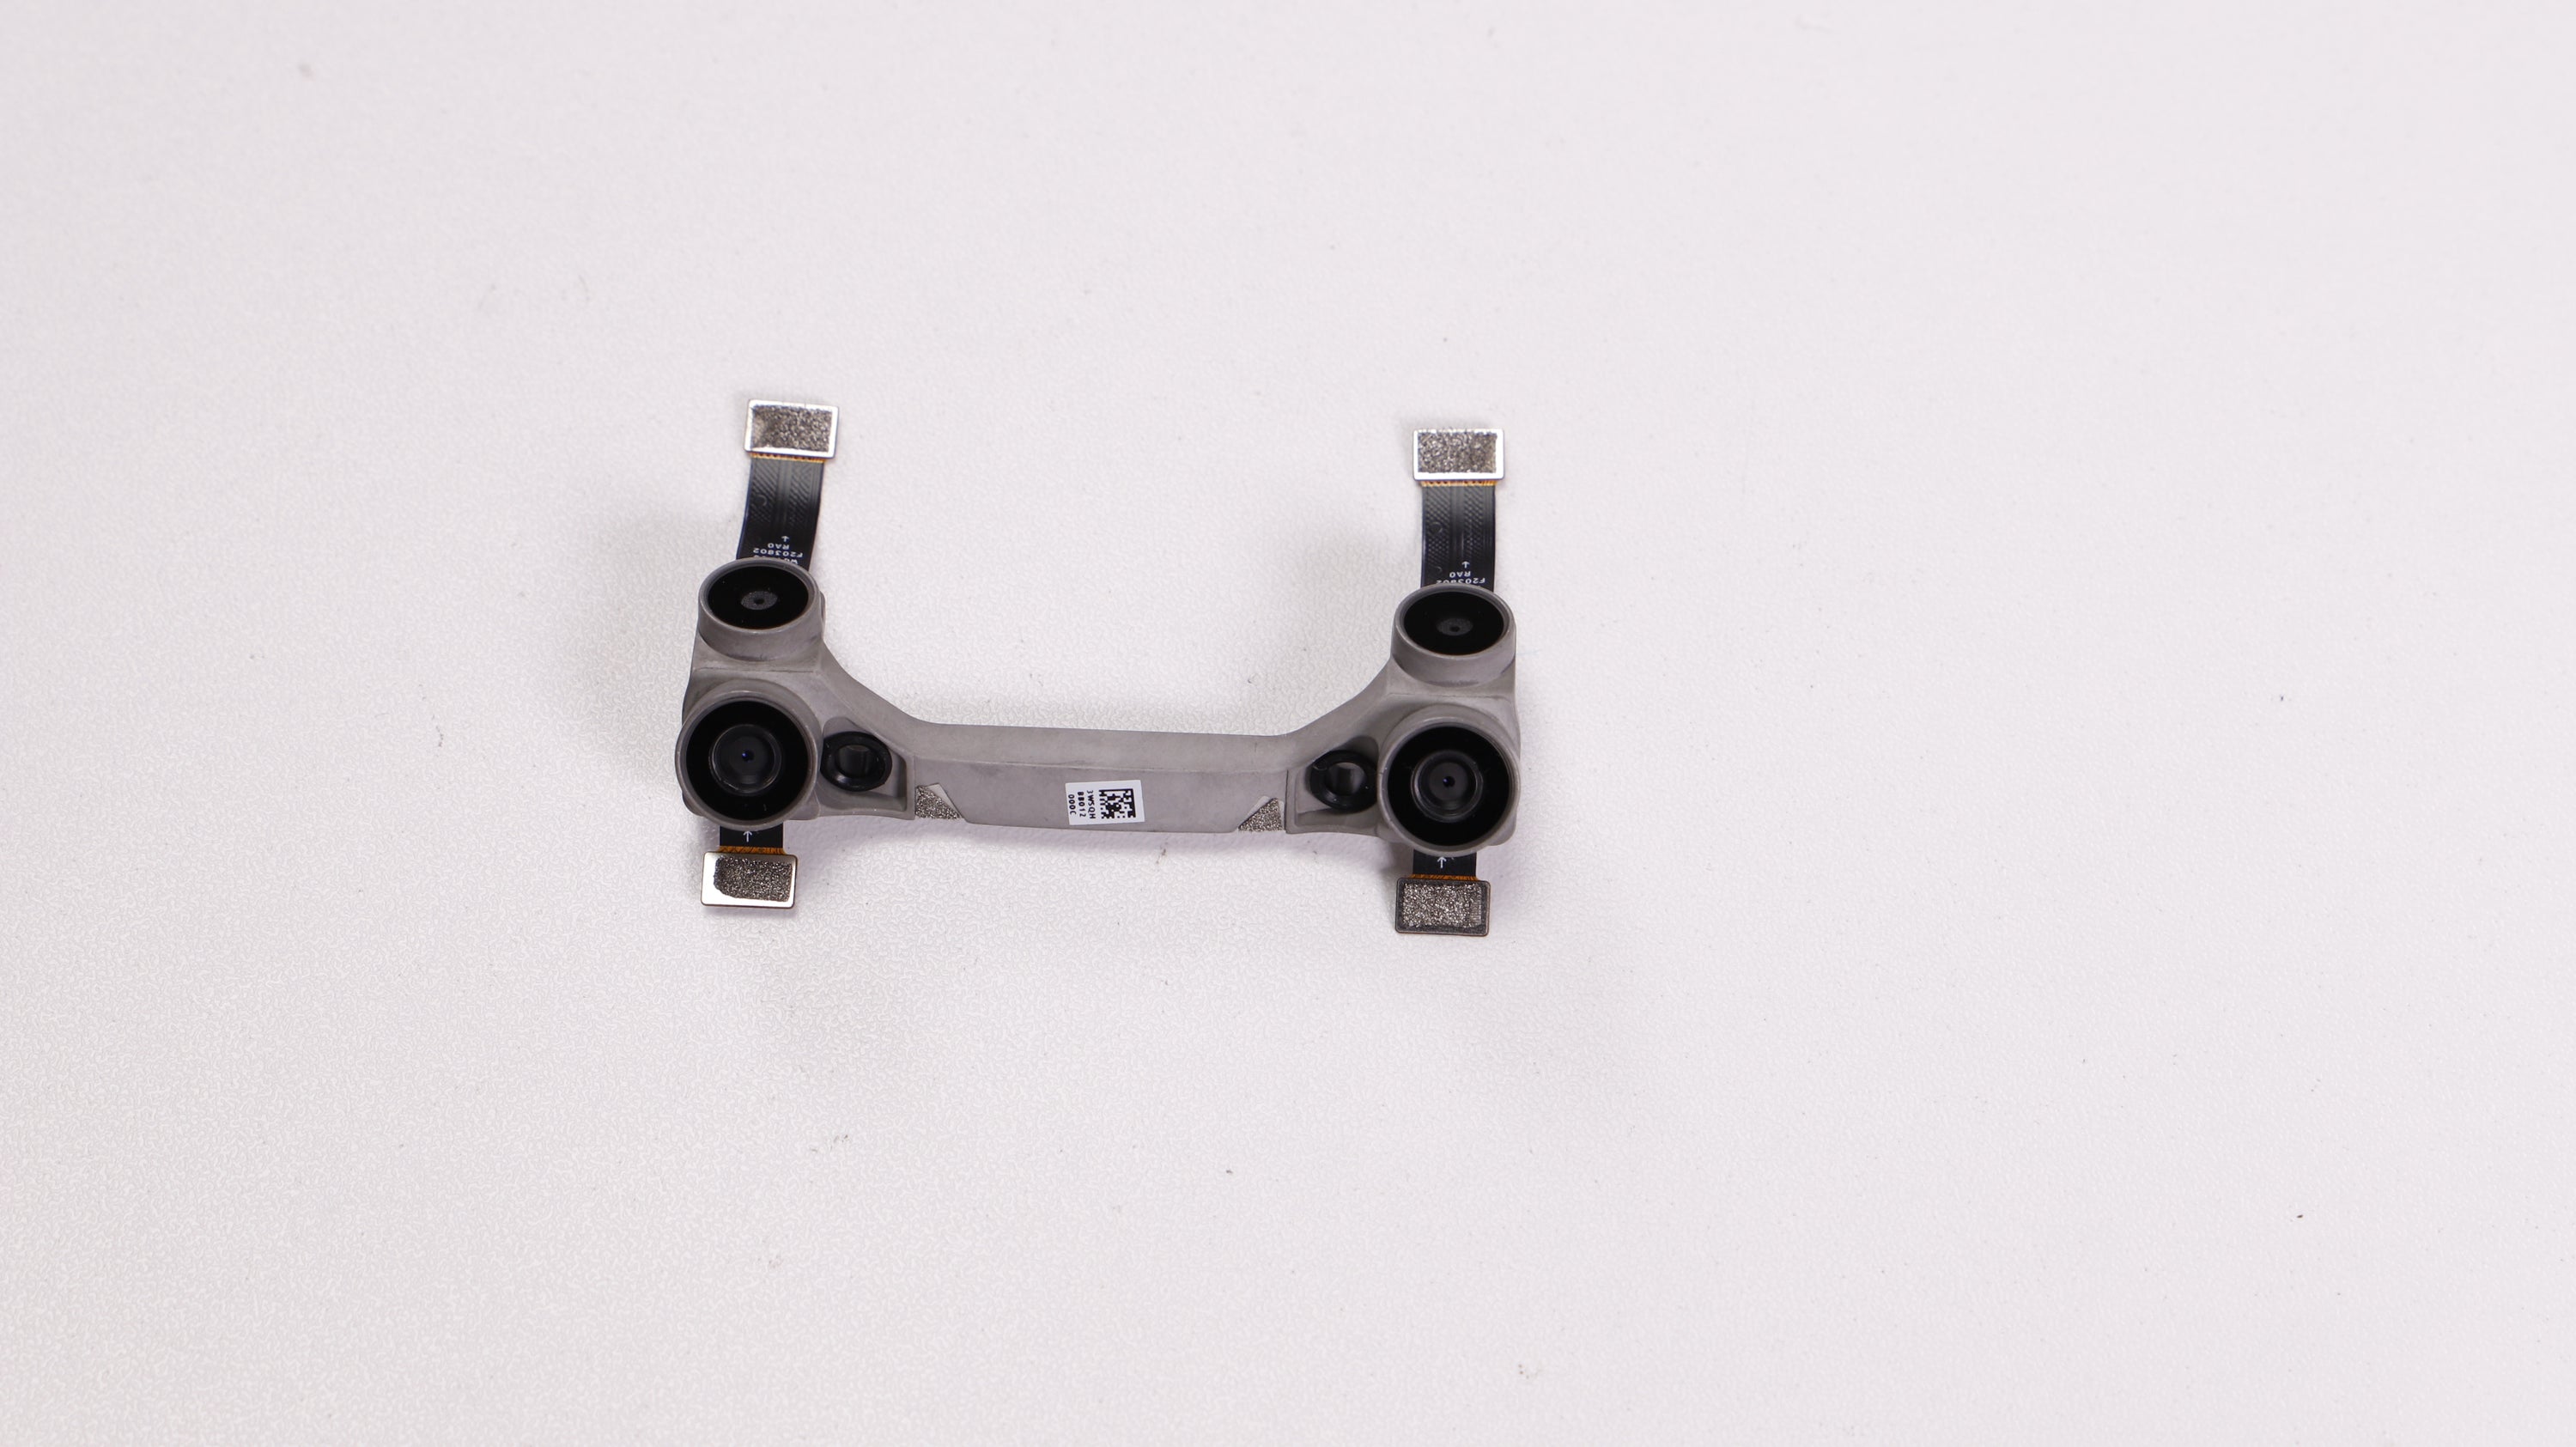 Air 2S Front and Upper Vision Sensor Module